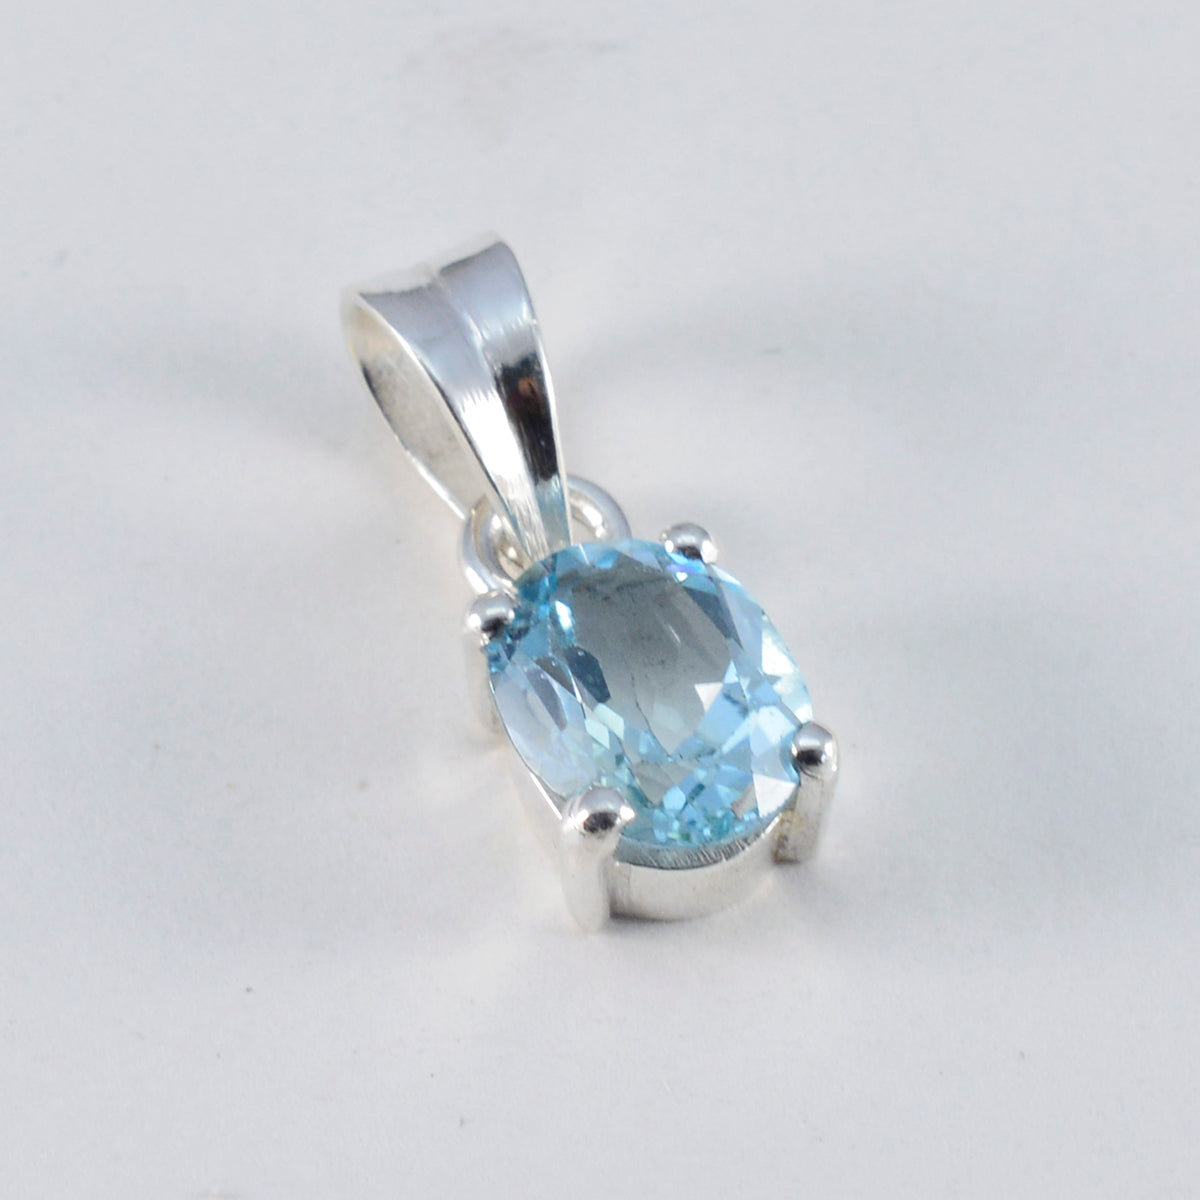 Riyo Fanciable Gemstone Oval Faceted Blue Blue Topaz Sterling Silver Pendant Gift For Christmas